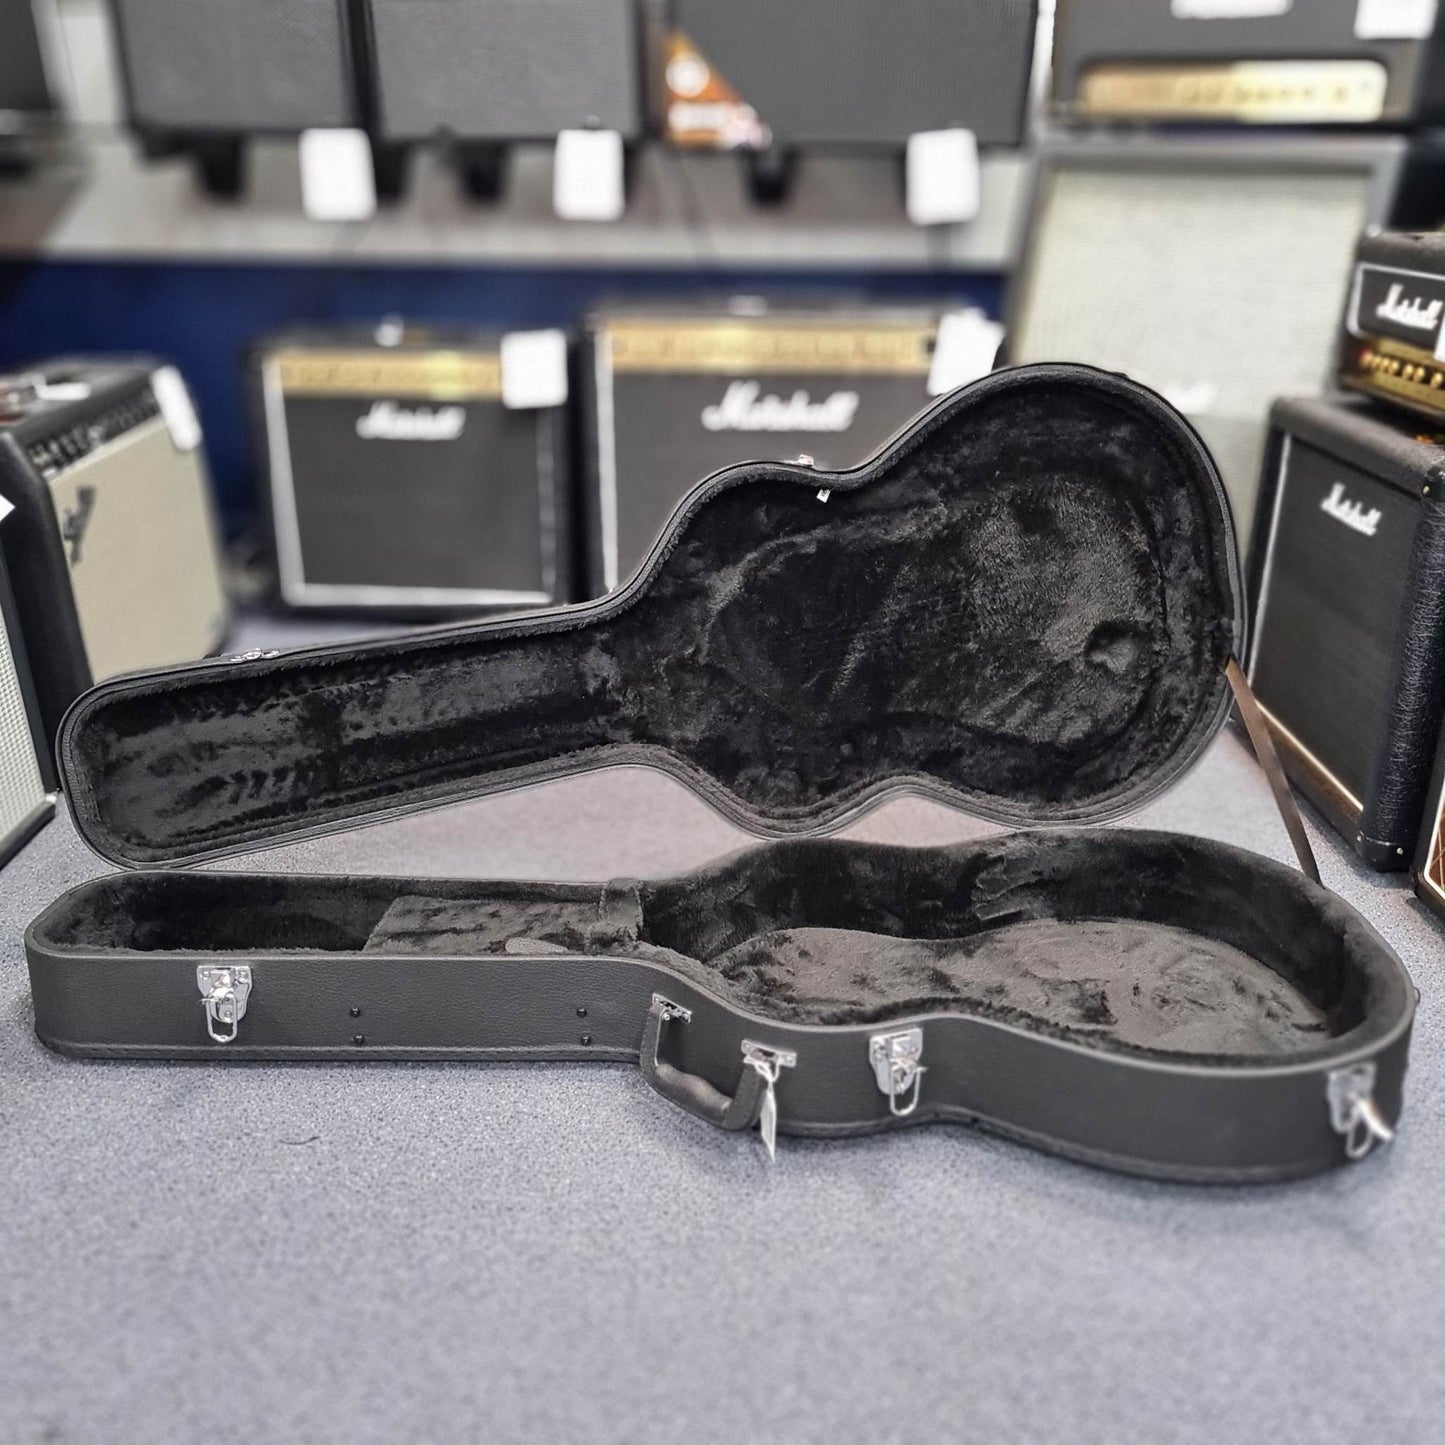 Gretsch Hard Case for Thinbody Guitars with Tremelo